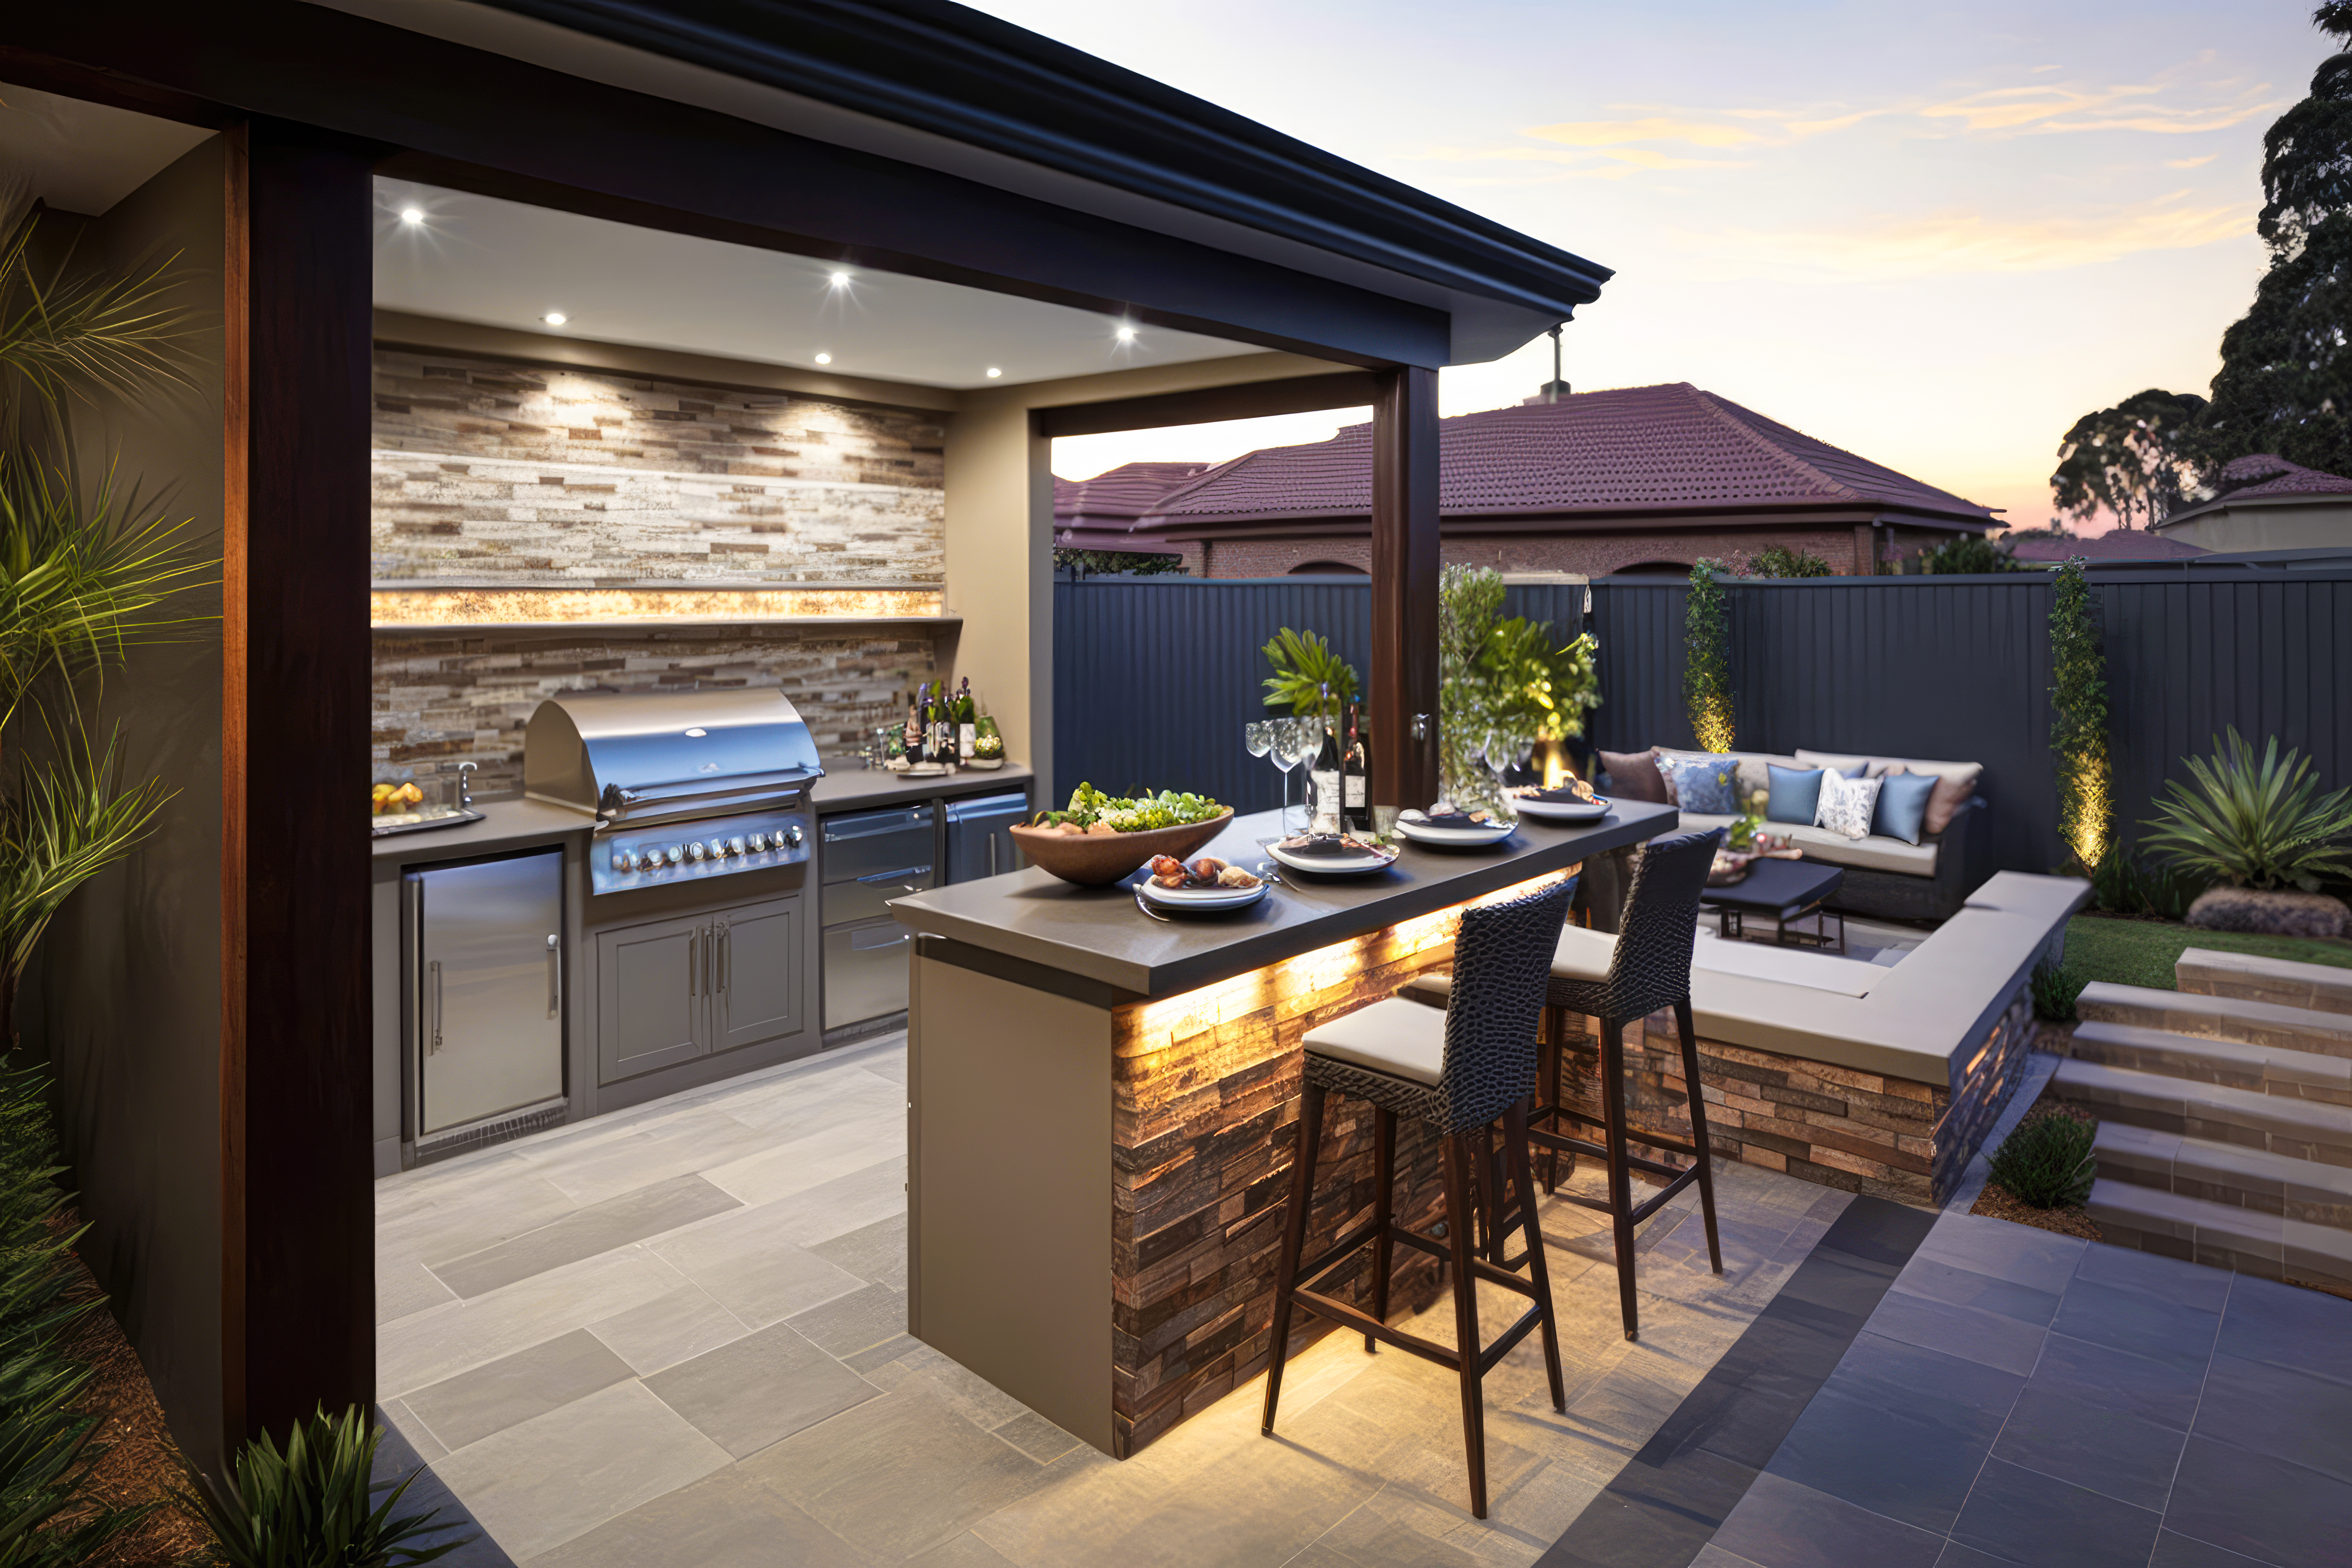 Power Your Outdoor Kitchen